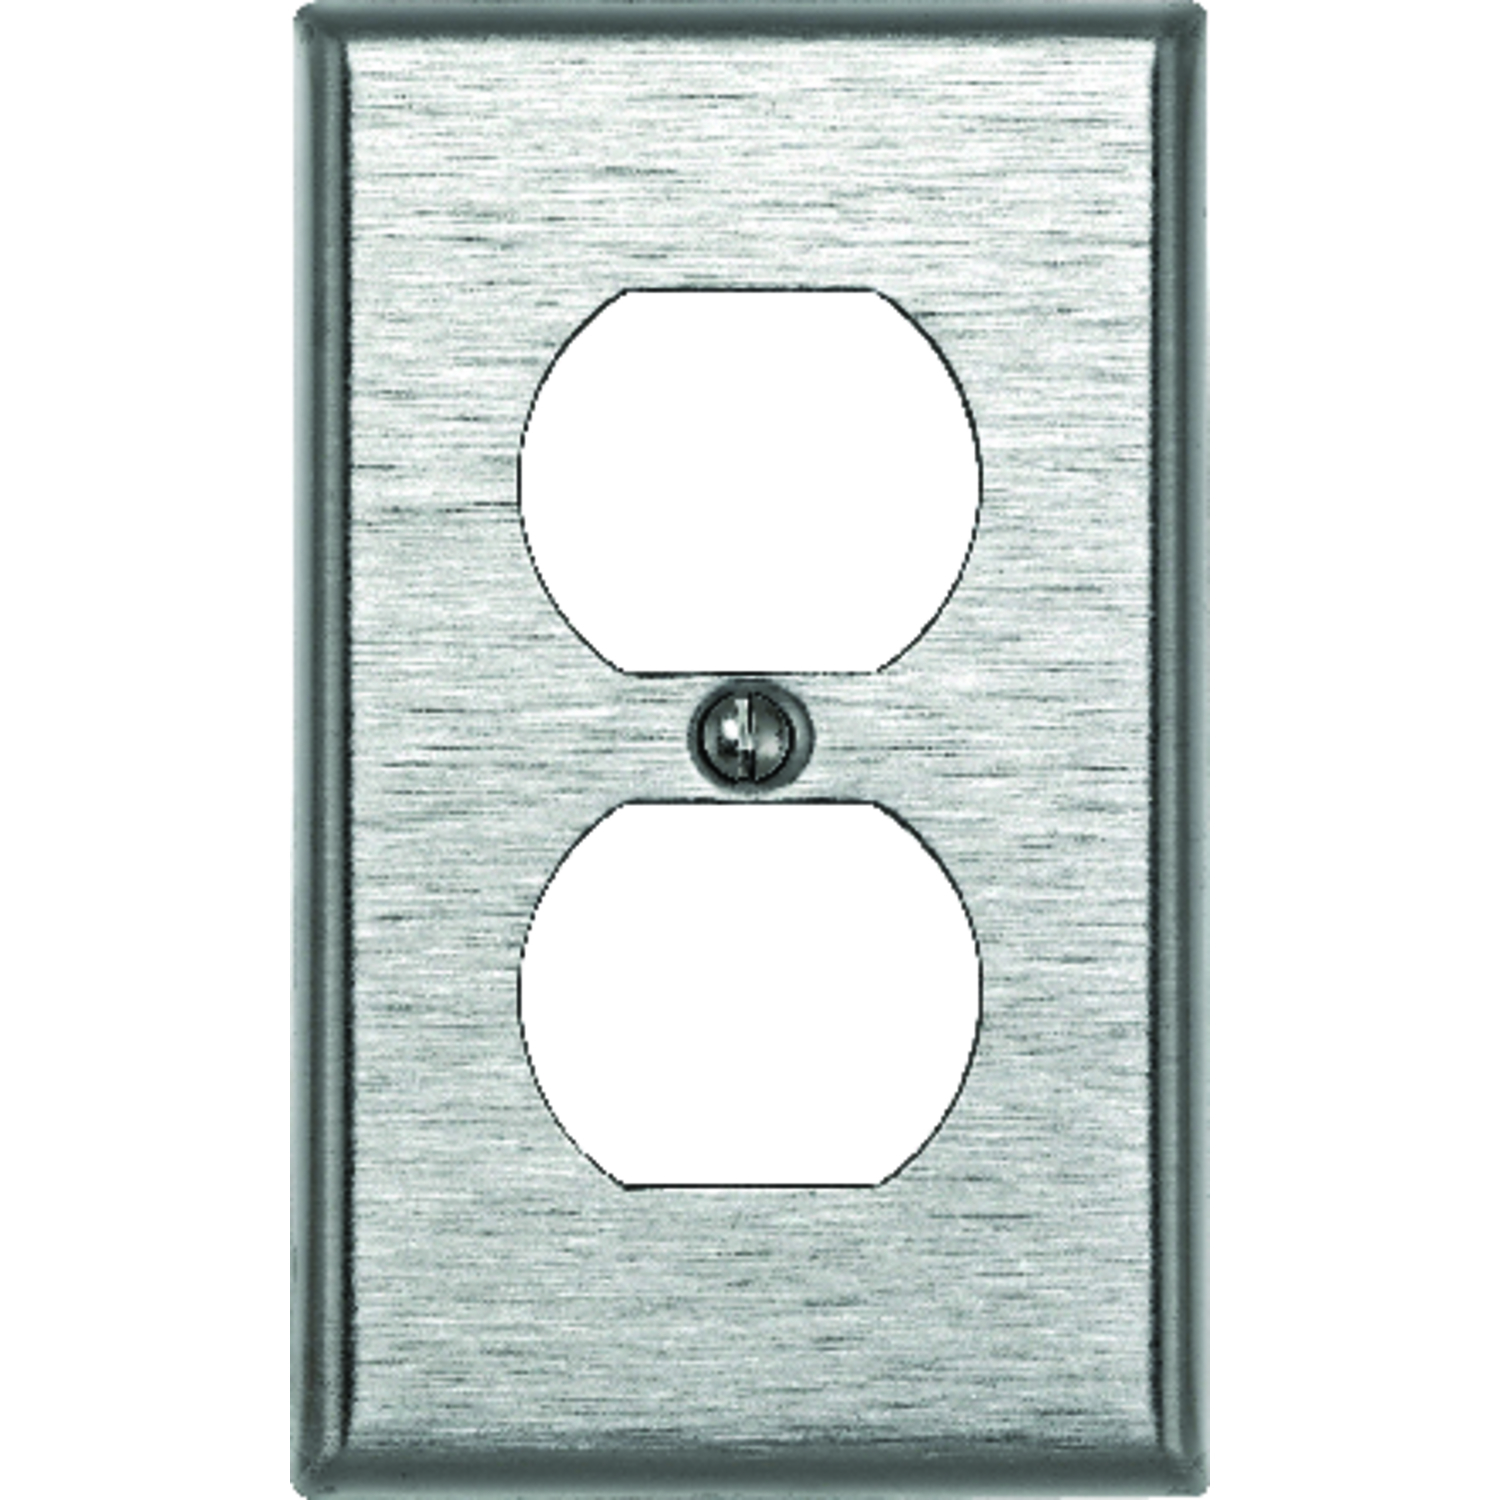 Leviton Silver 1 gang Stainless Steel Duplex Outlet Wall Plate 1 pk